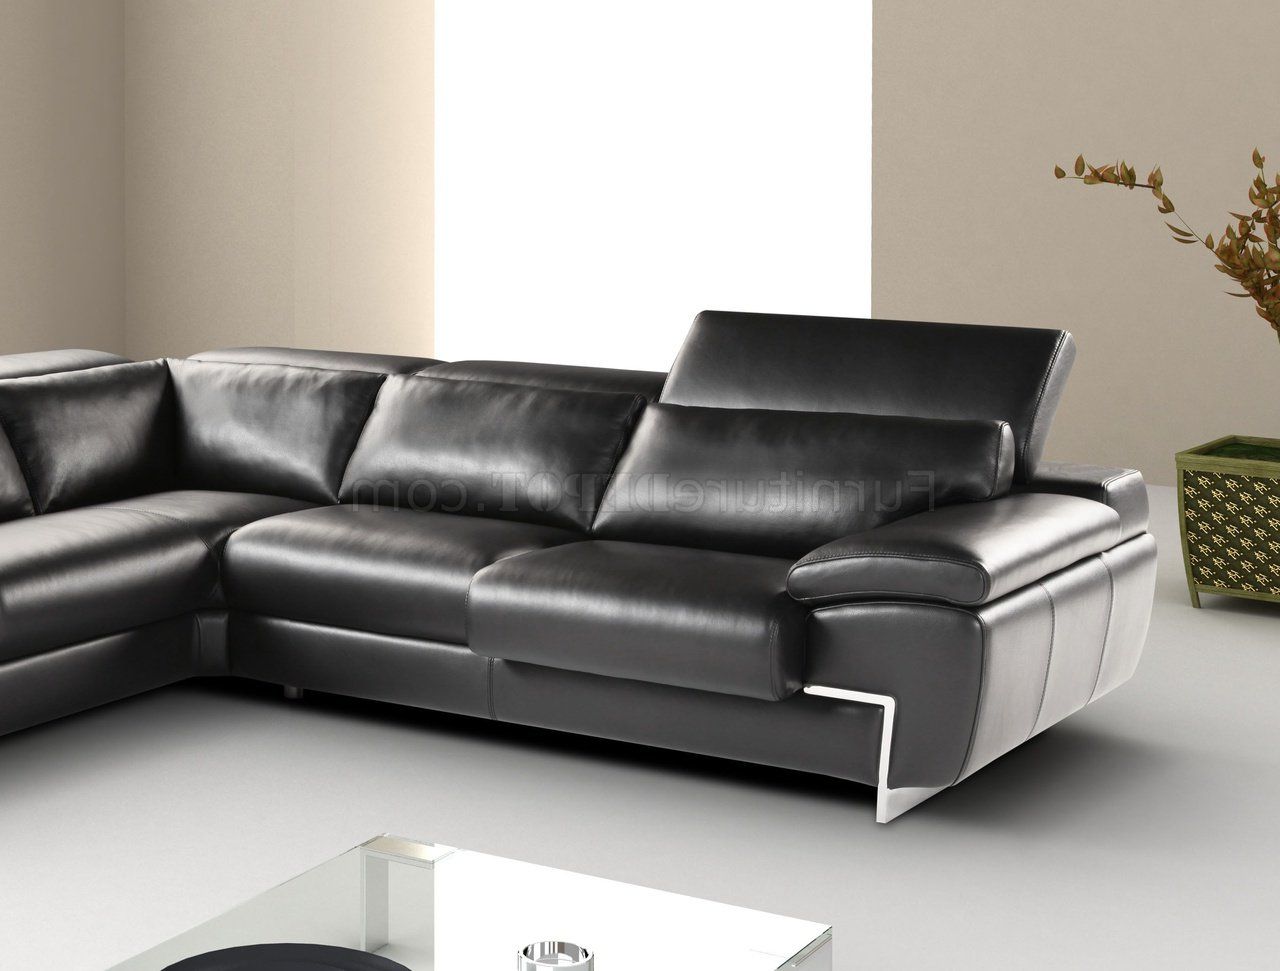 Wynne Contemporary Sectional Sofas Black With Favorite Black Full Leather Modern Sectional Sofa W/adjustable Headrest (View 6 of 25)